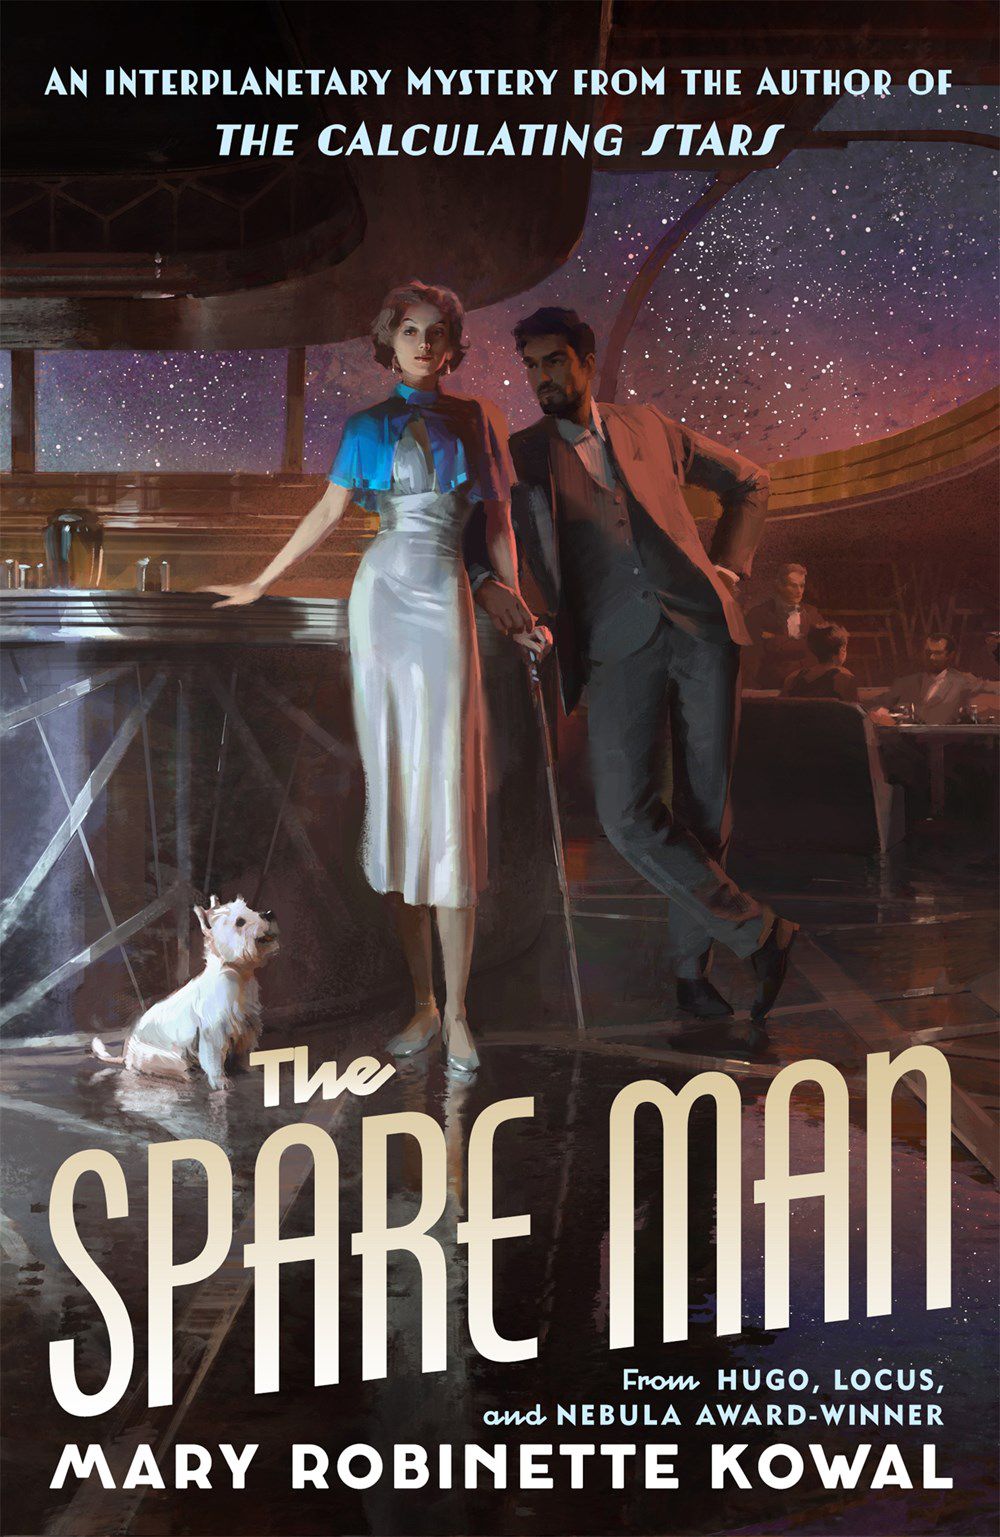 Cover image for Mary Robinette Kowal's The Spare Man, featuring two figures standing in front of a bar with a dog next to them